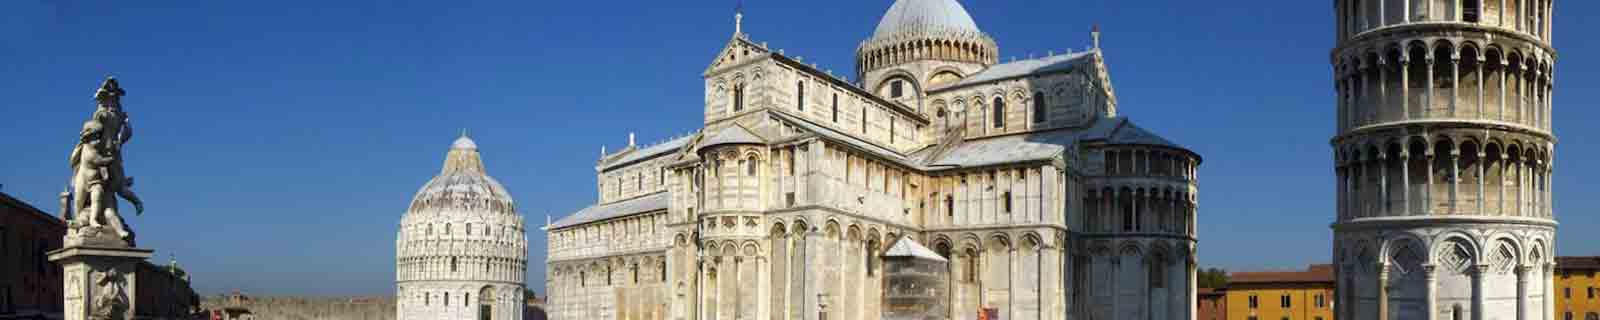 Panoramic photo of the Piazza del Miracoli in Pisa, a top highlioght for cruise travelers to the port of Livorno